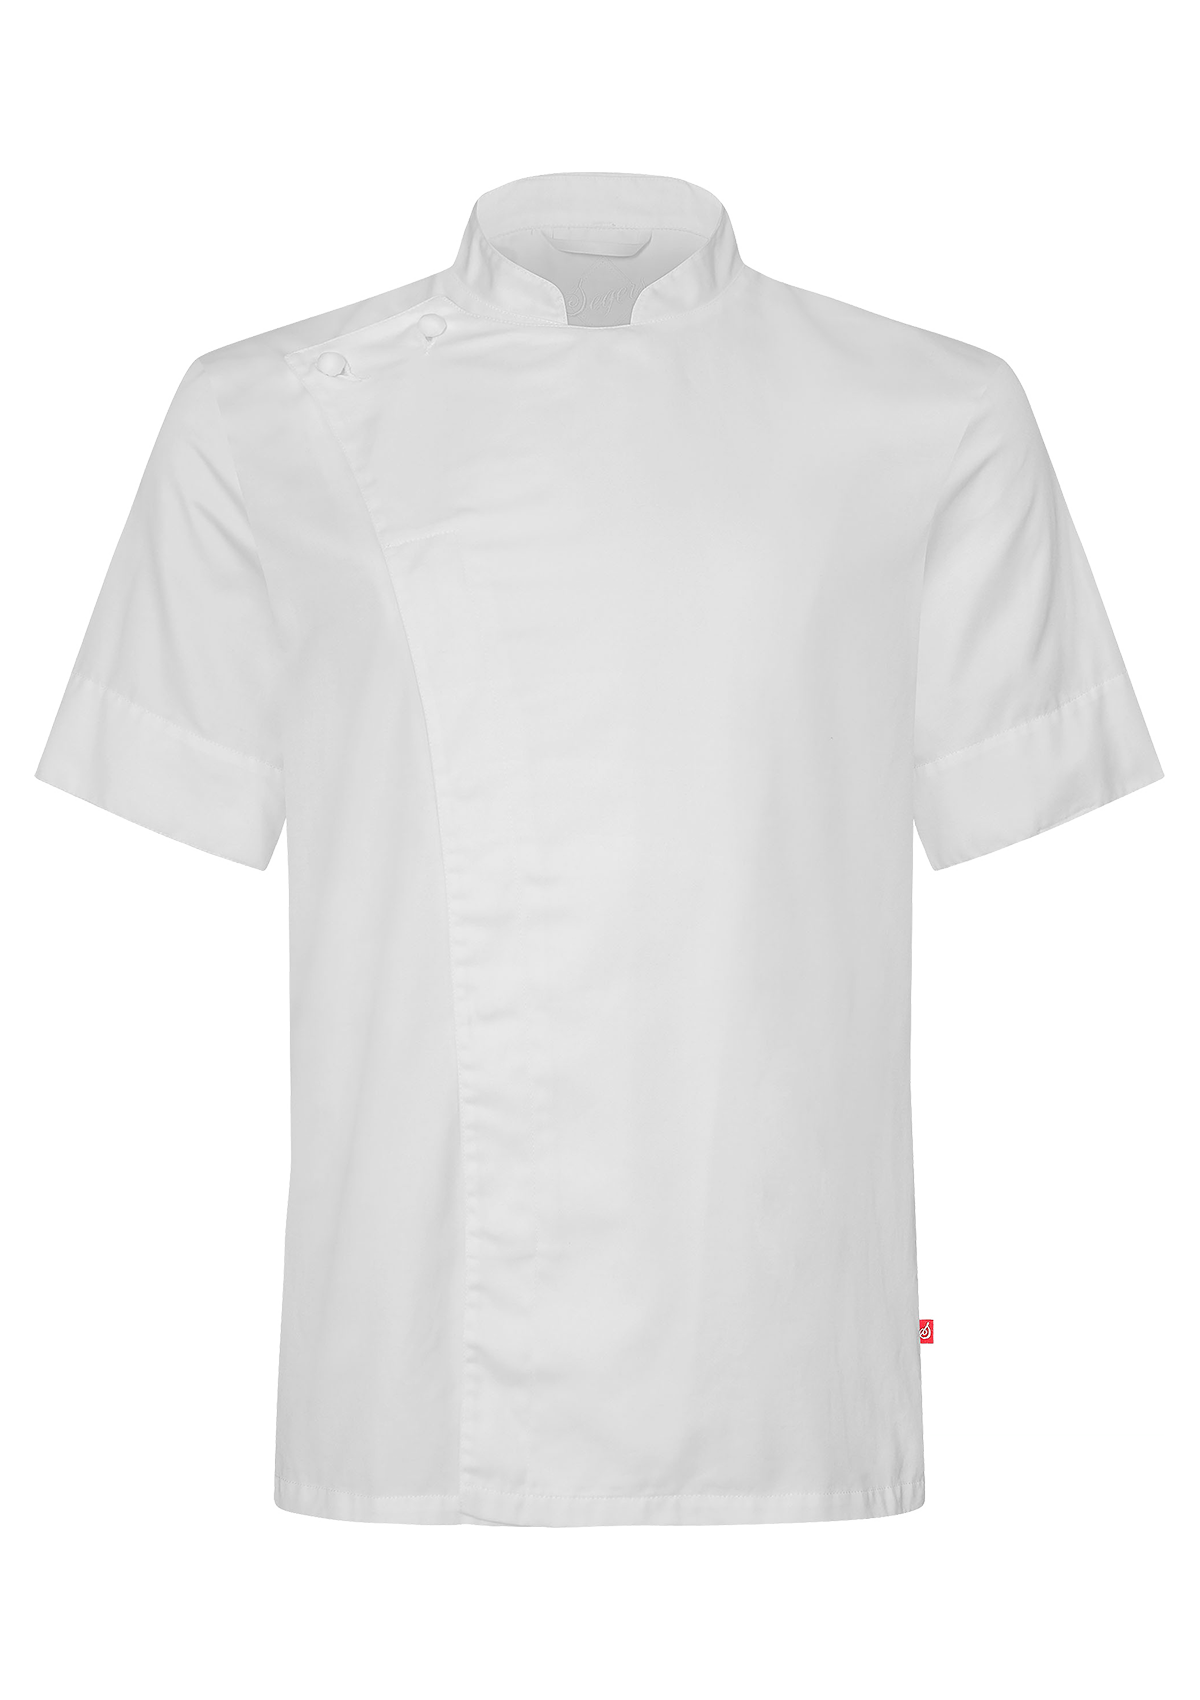 Unisex Chef's jacket in stretch with short sleeves. Segers | Cookniche